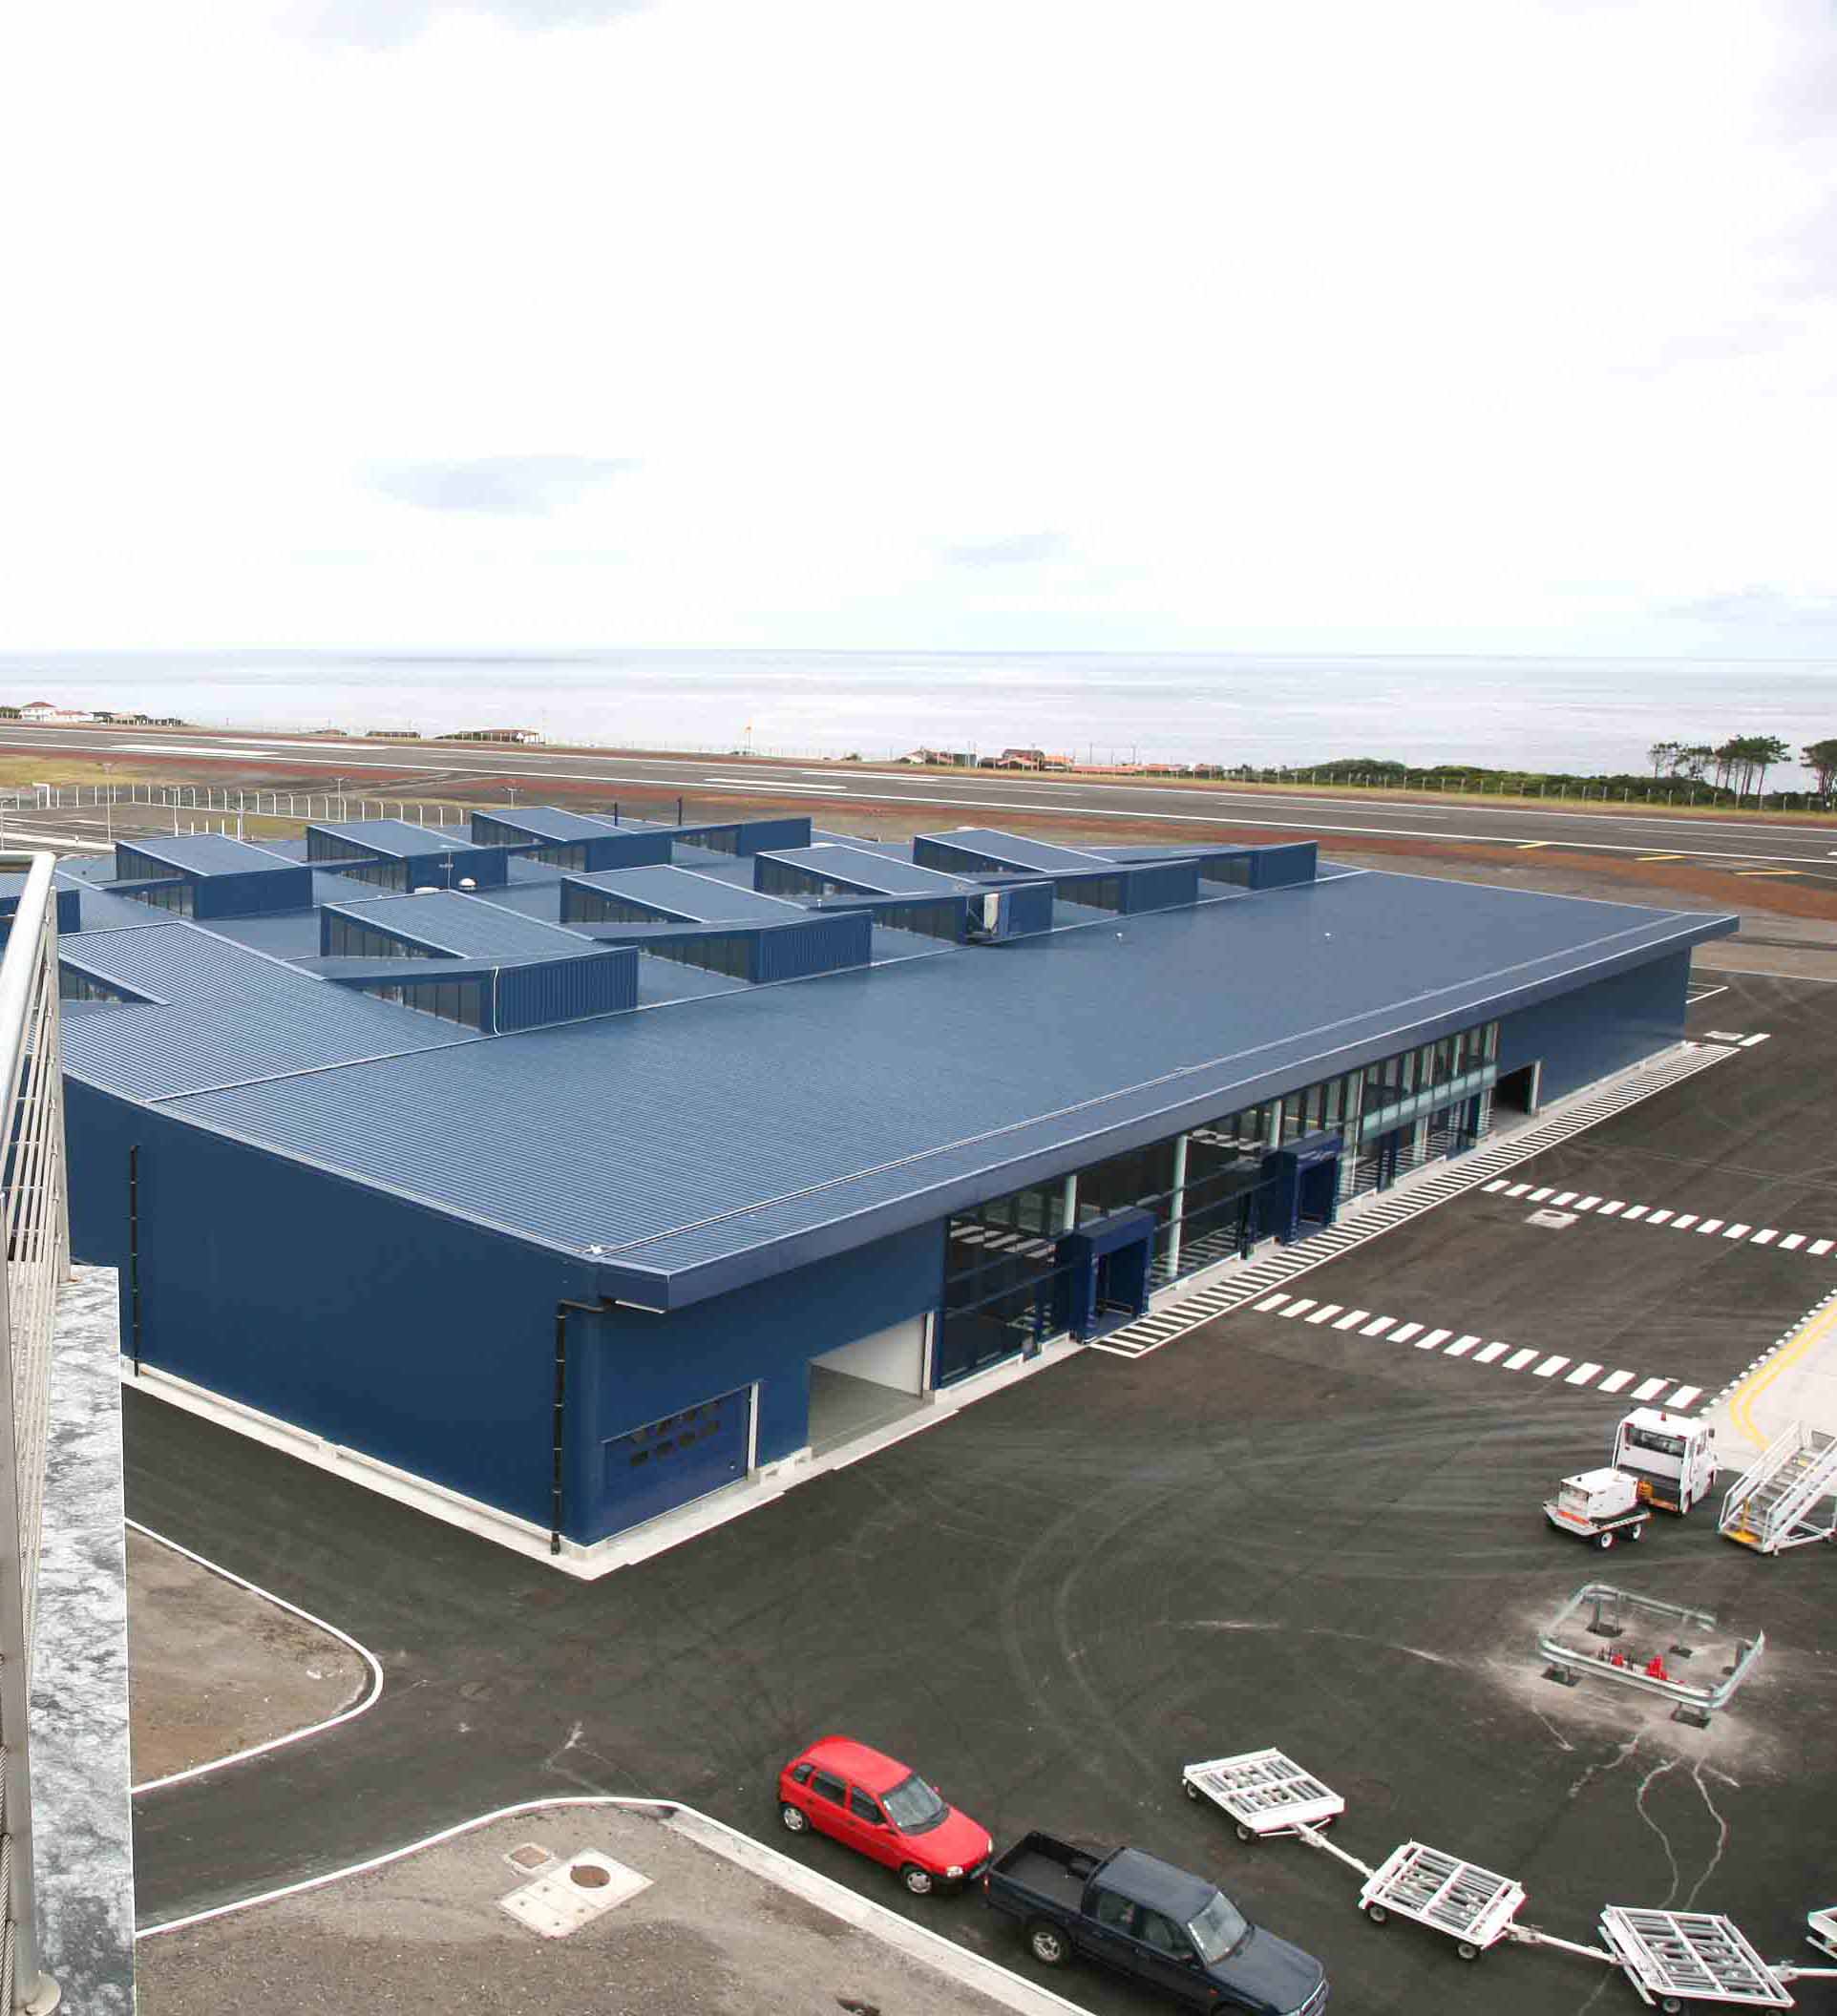 Azorean airports received 1.9 million passengers in 2008